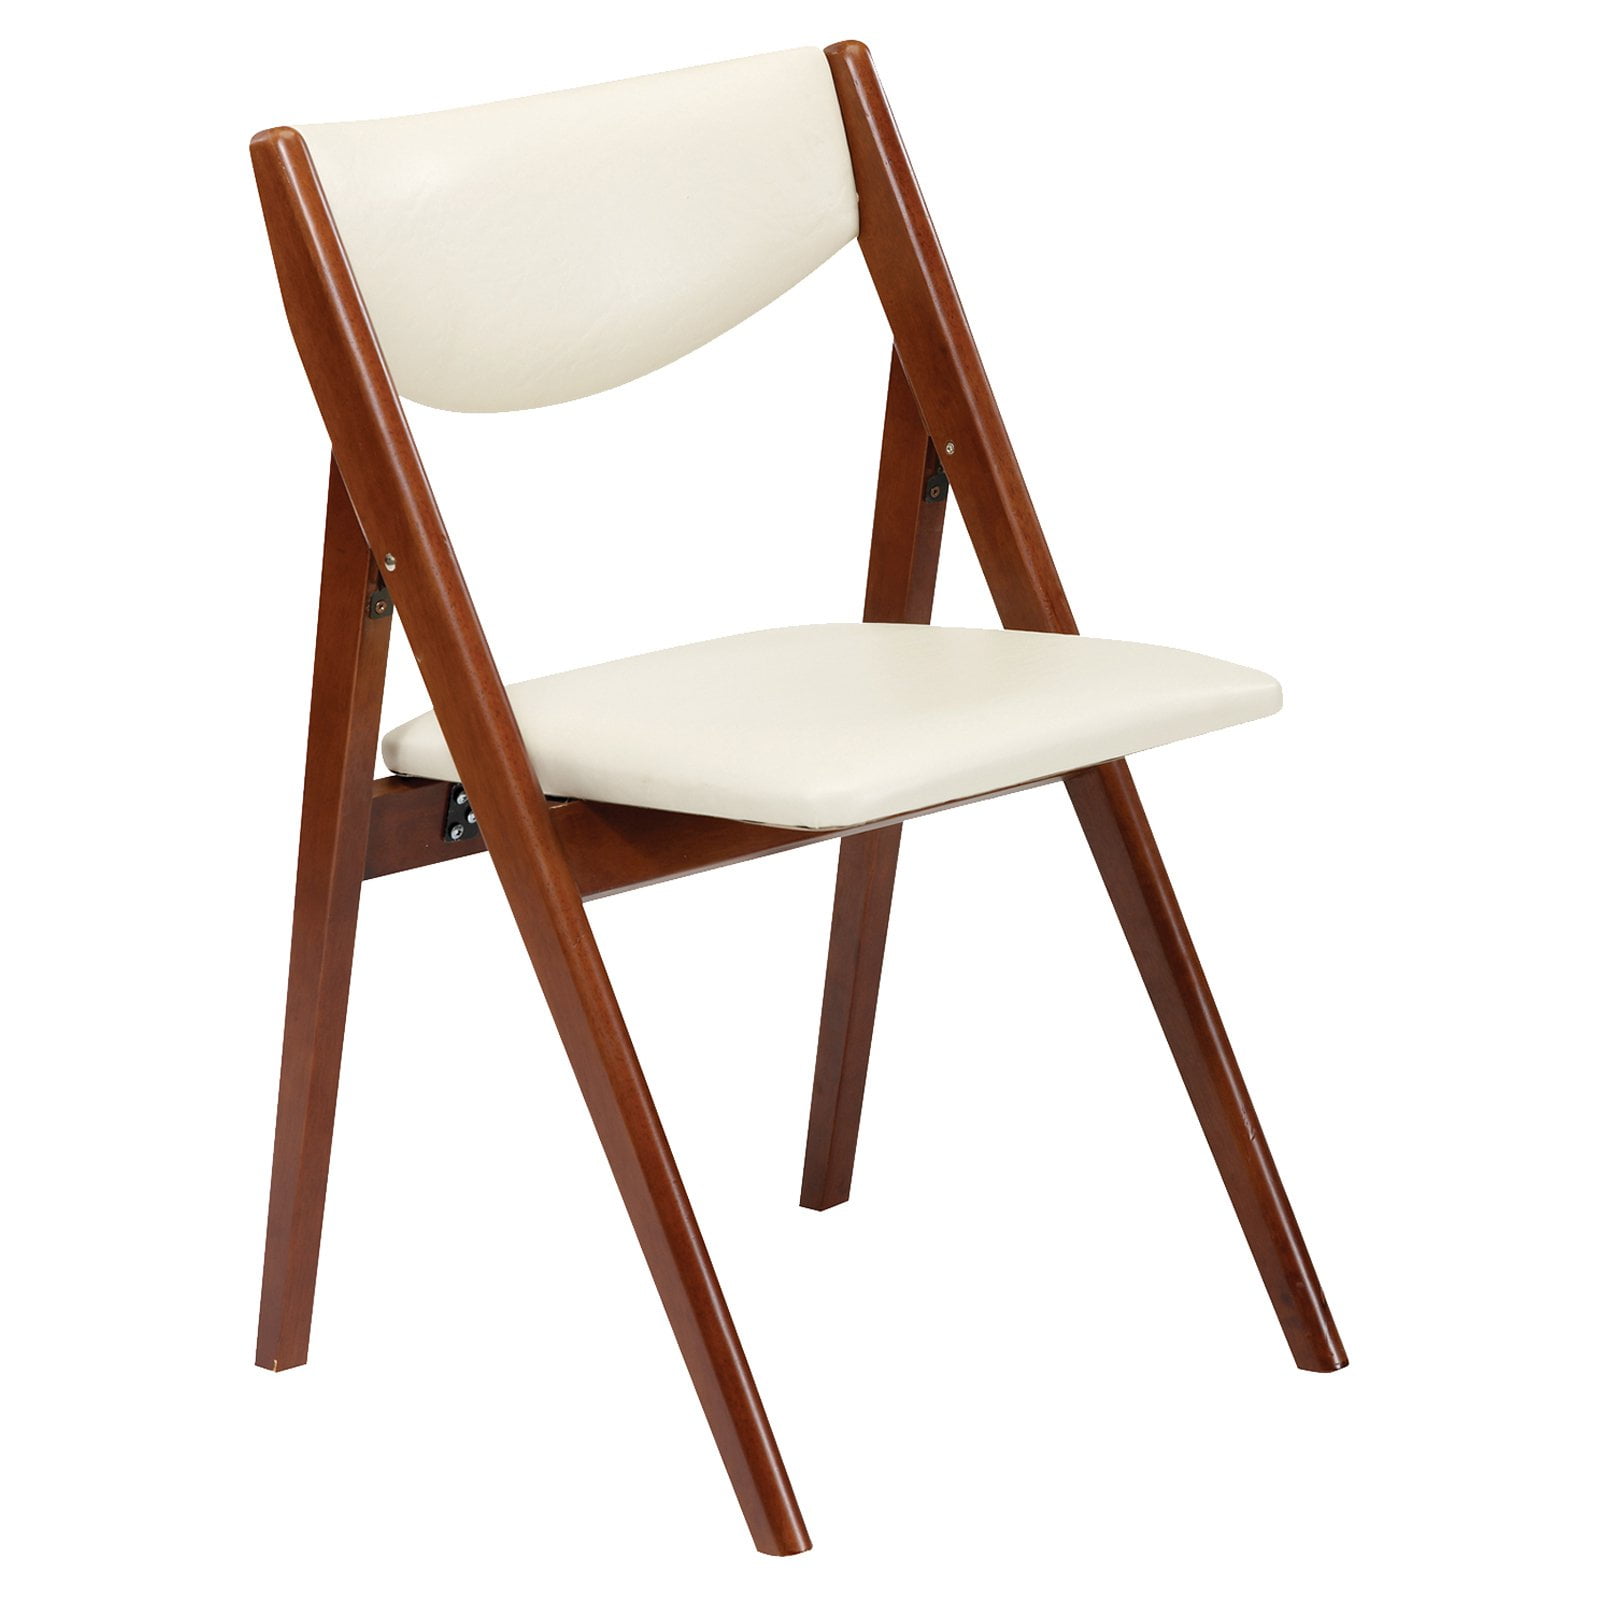 wooden folding chairs for sale wholesale